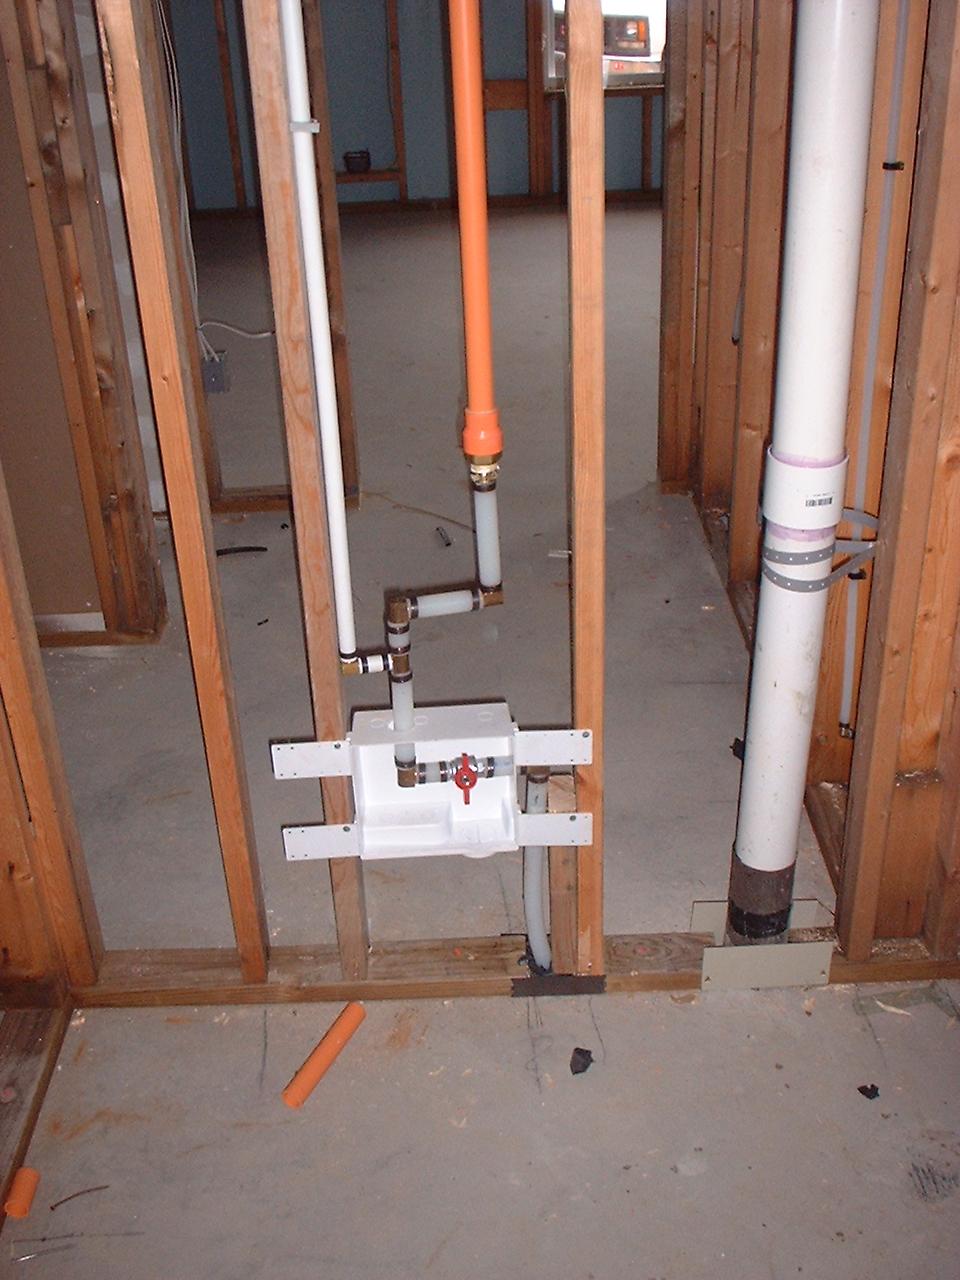 Point of attachment of sprinkler system to domestic water entry To water heater